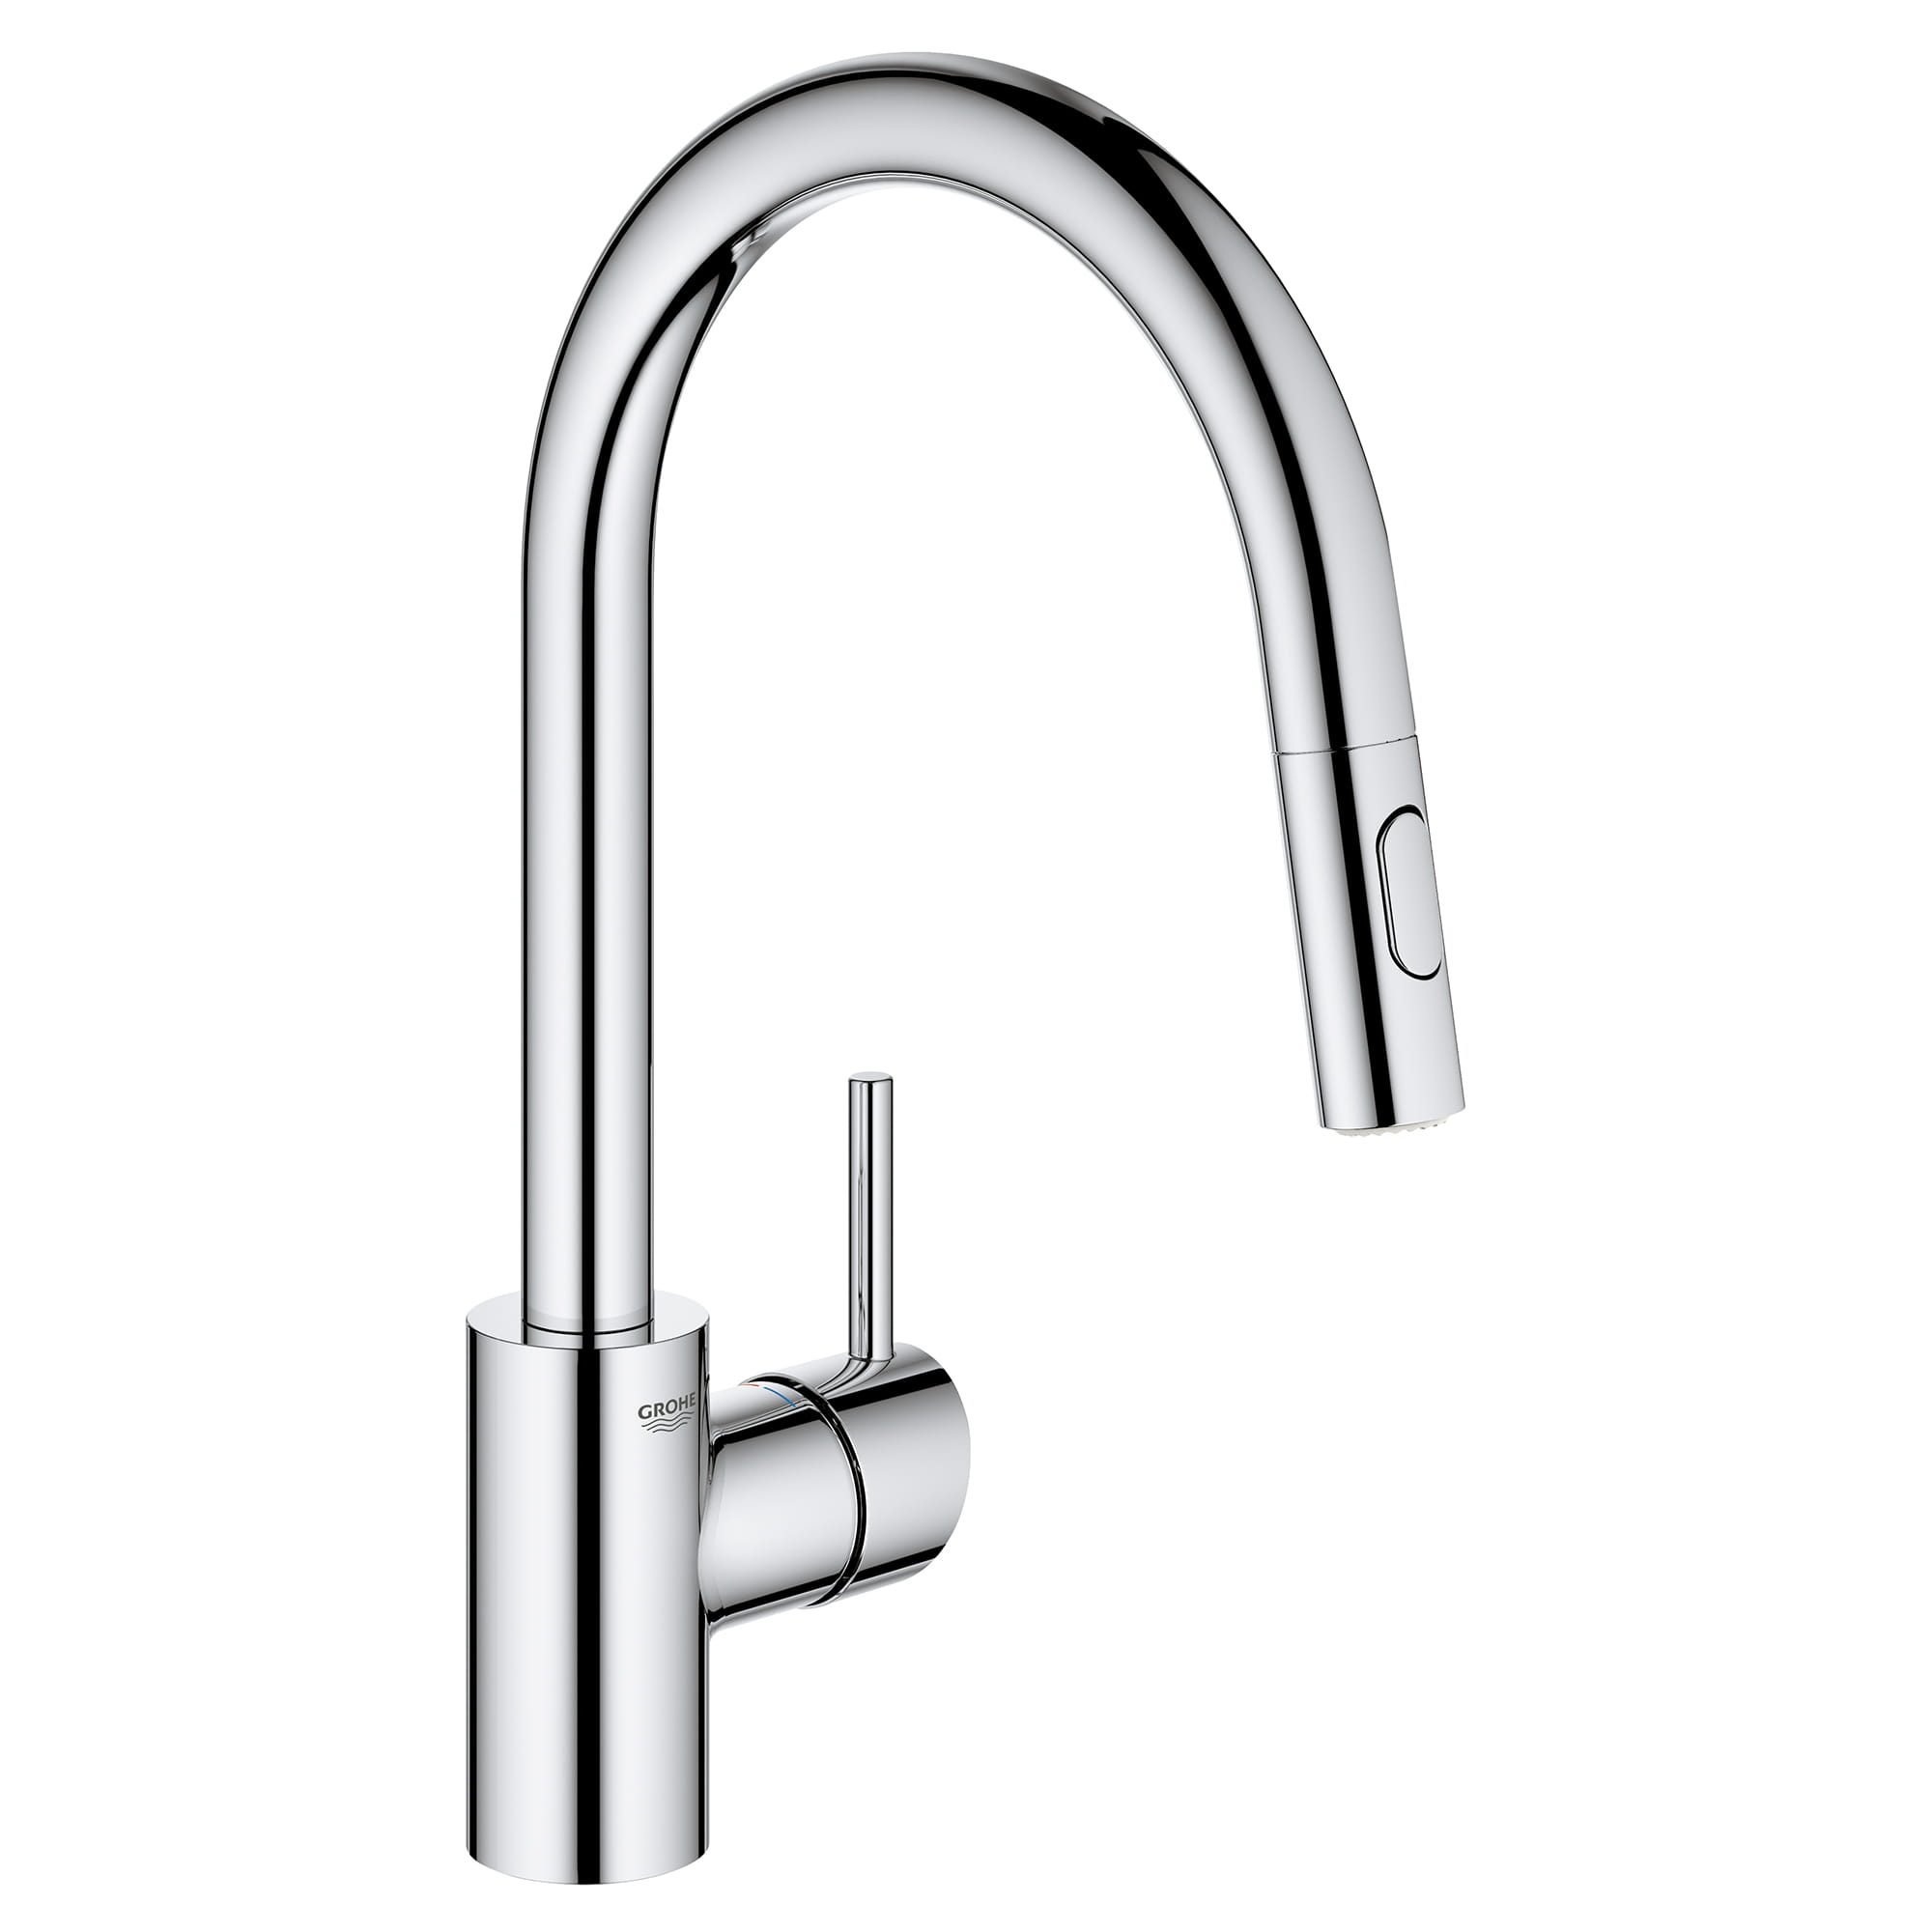 Single Handle Pull Down Kitchen Faucet Dual Spray 15 GPM GROHE CHROME